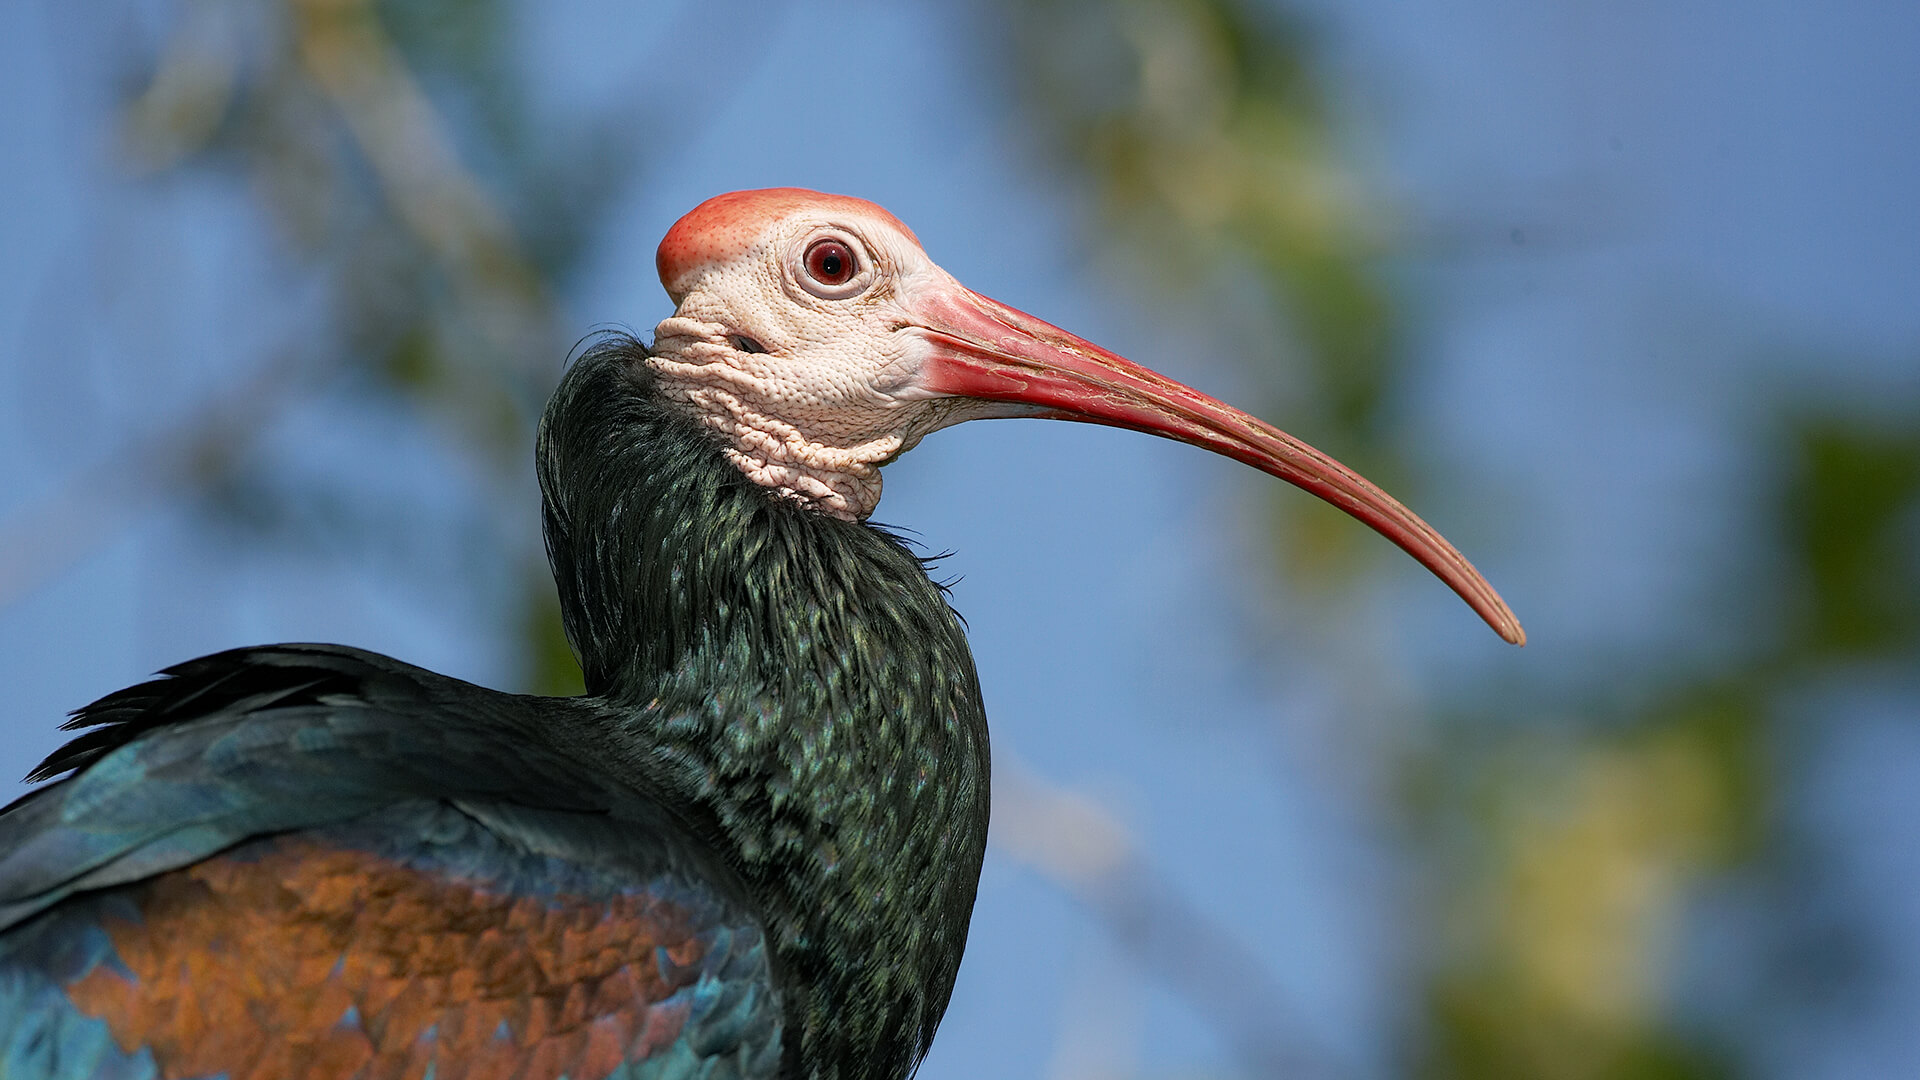 A Bald ibis shows off its long curved beak in profile